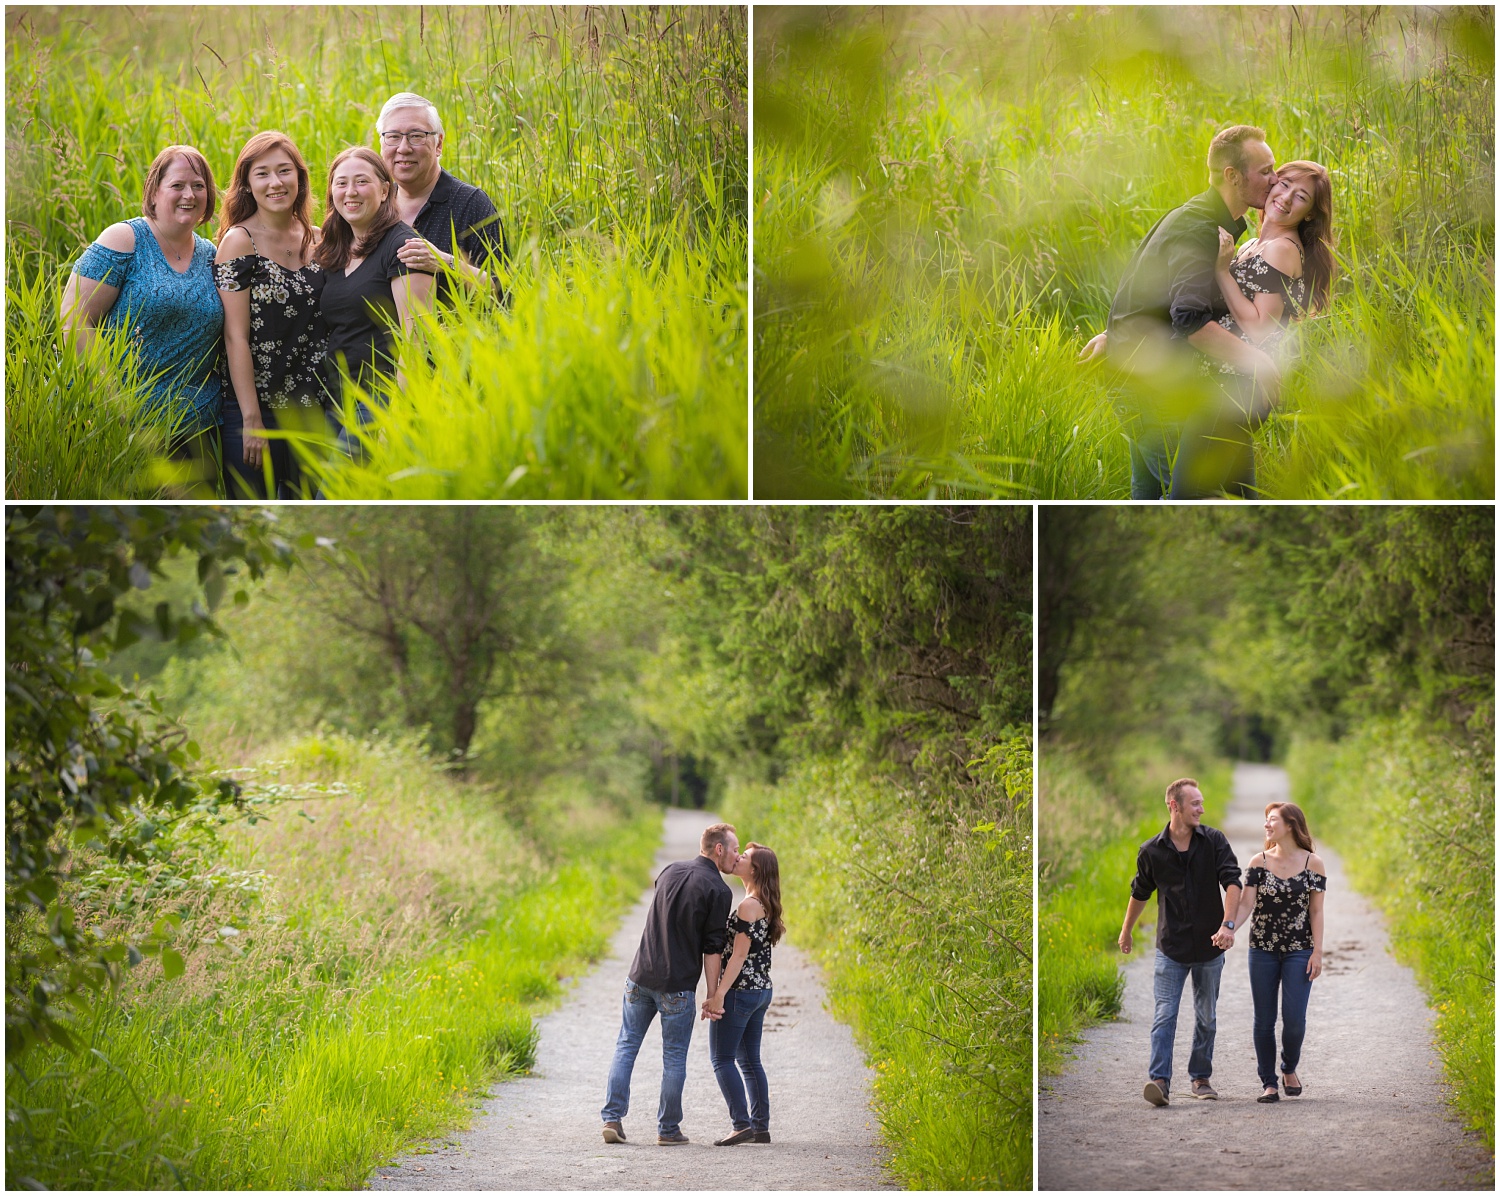 Amazing Day Photography - Campbell Valley Anniversary Session - Campbell Valely Family Session - Langely Family Photographer (6).jpg